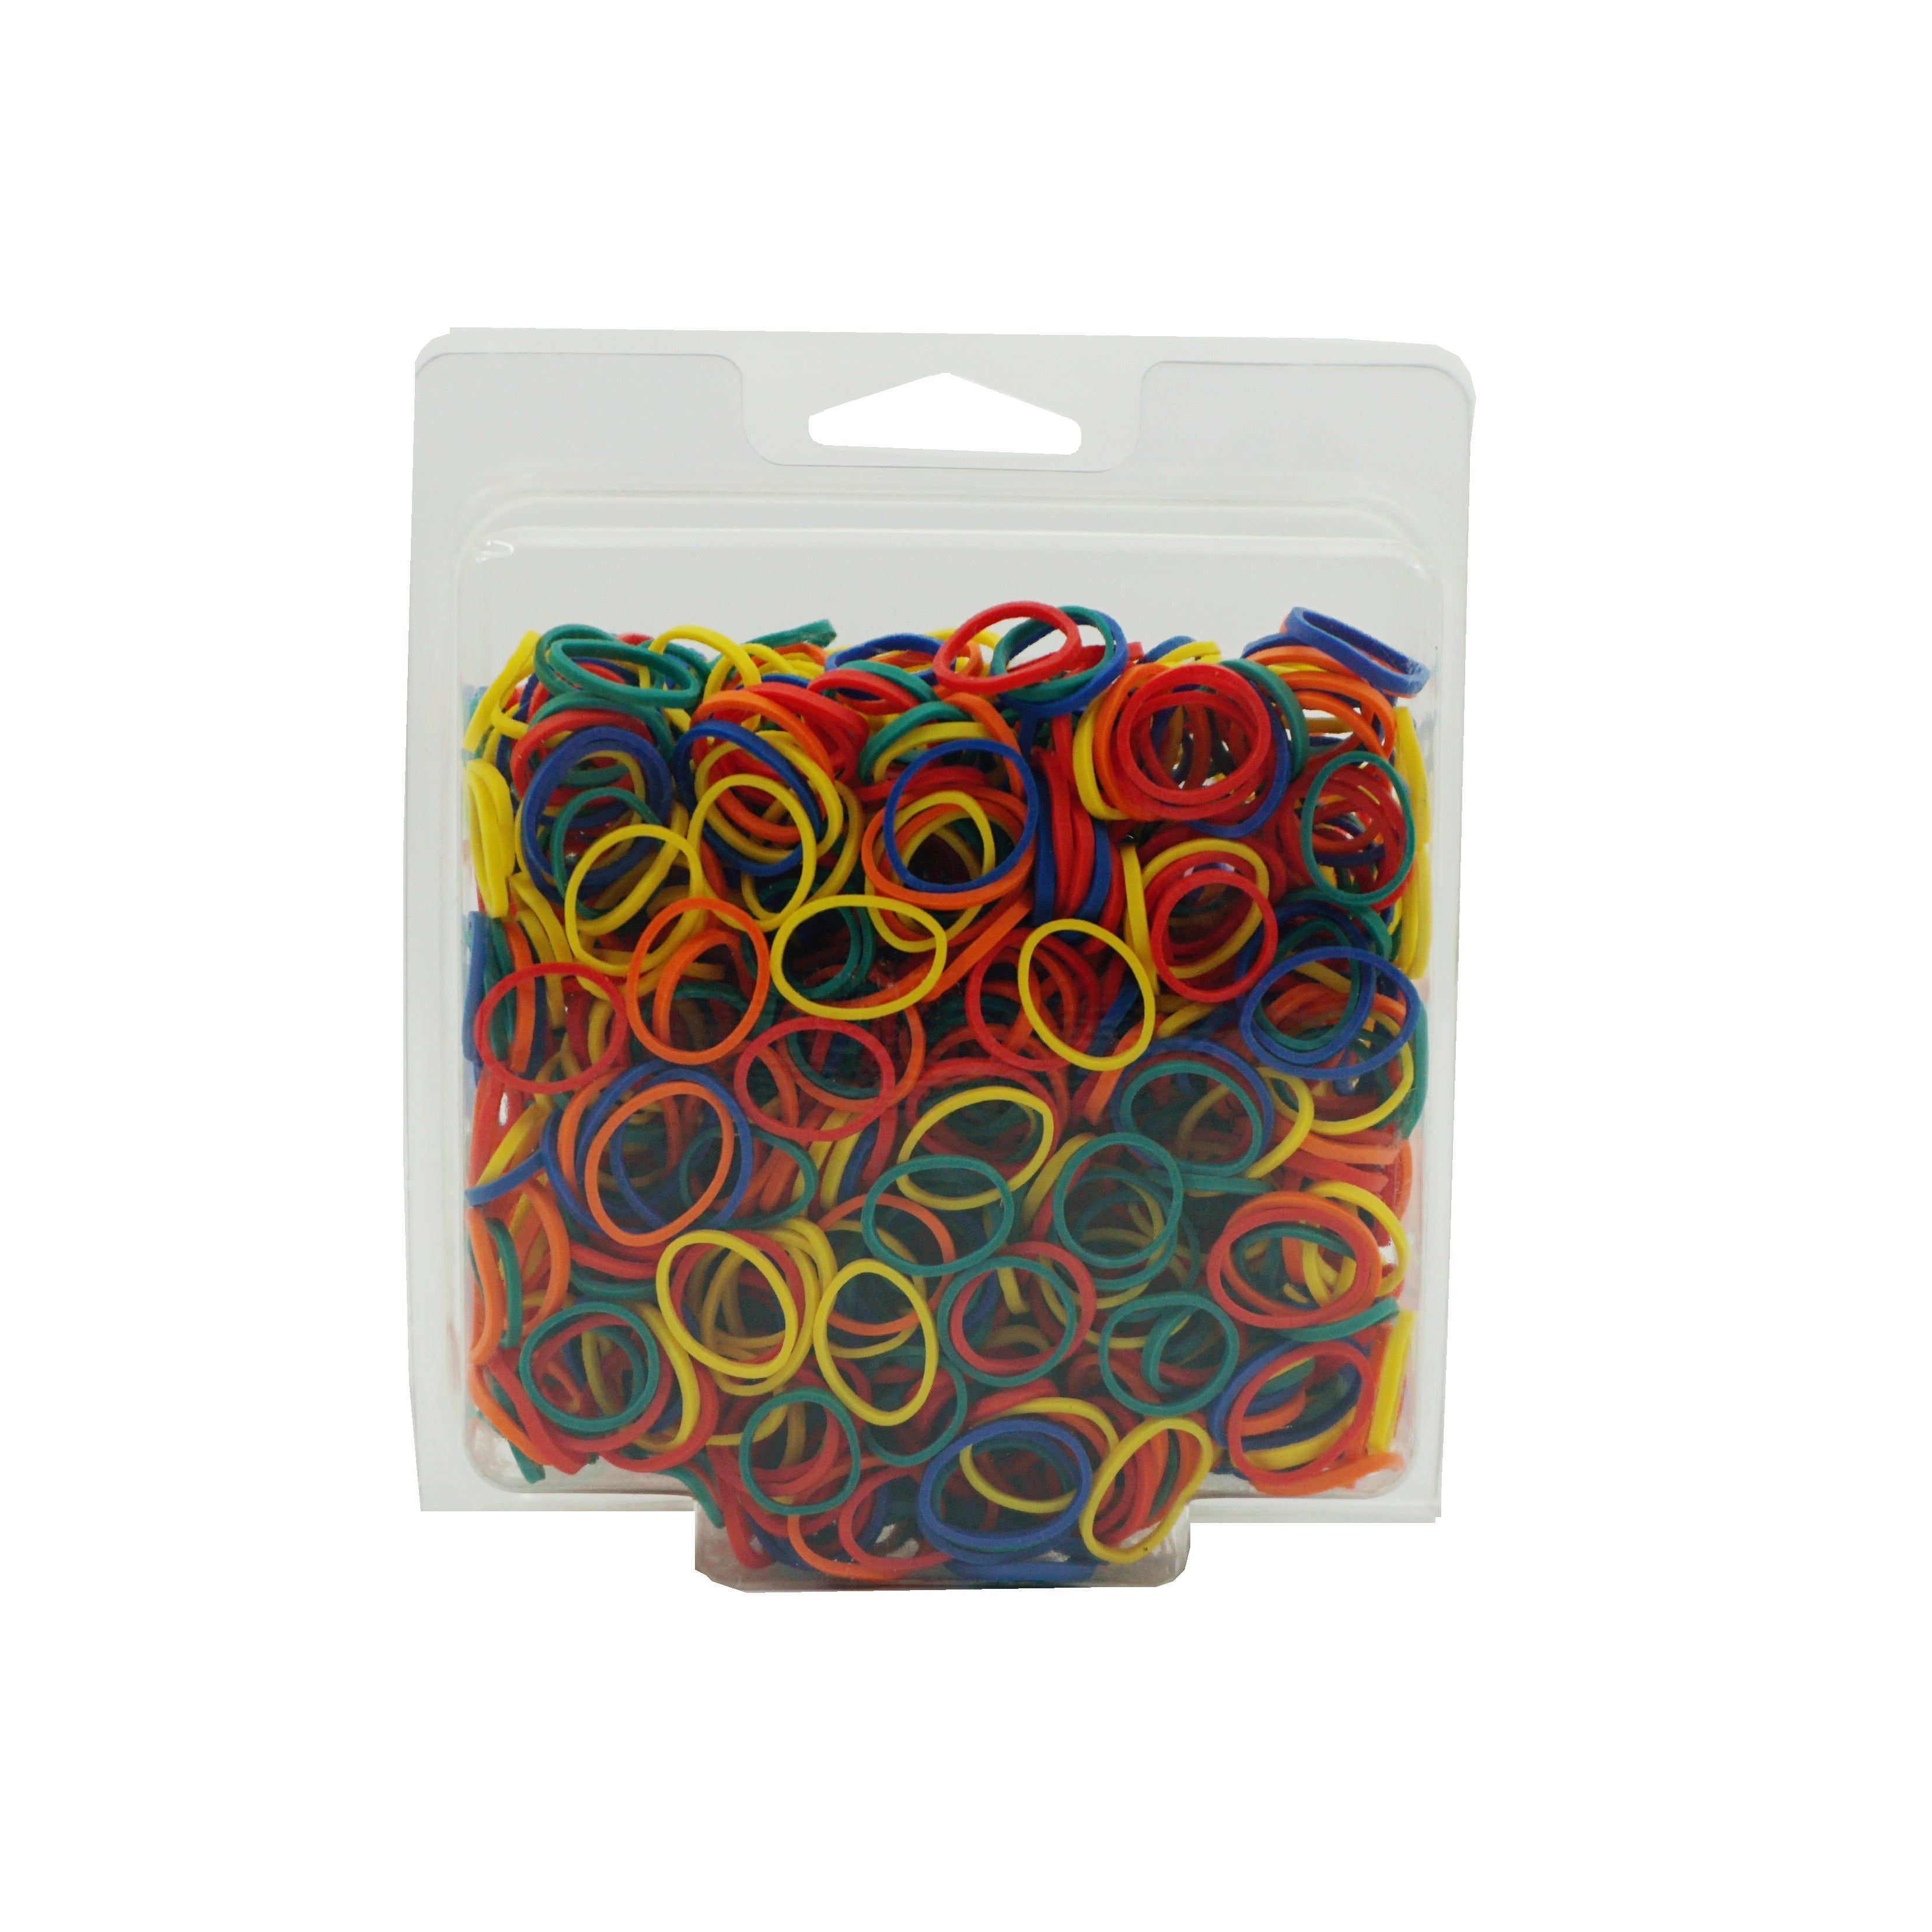 1000 Count Rubber Bands in Re-Closable Container for Ponytails and Braids